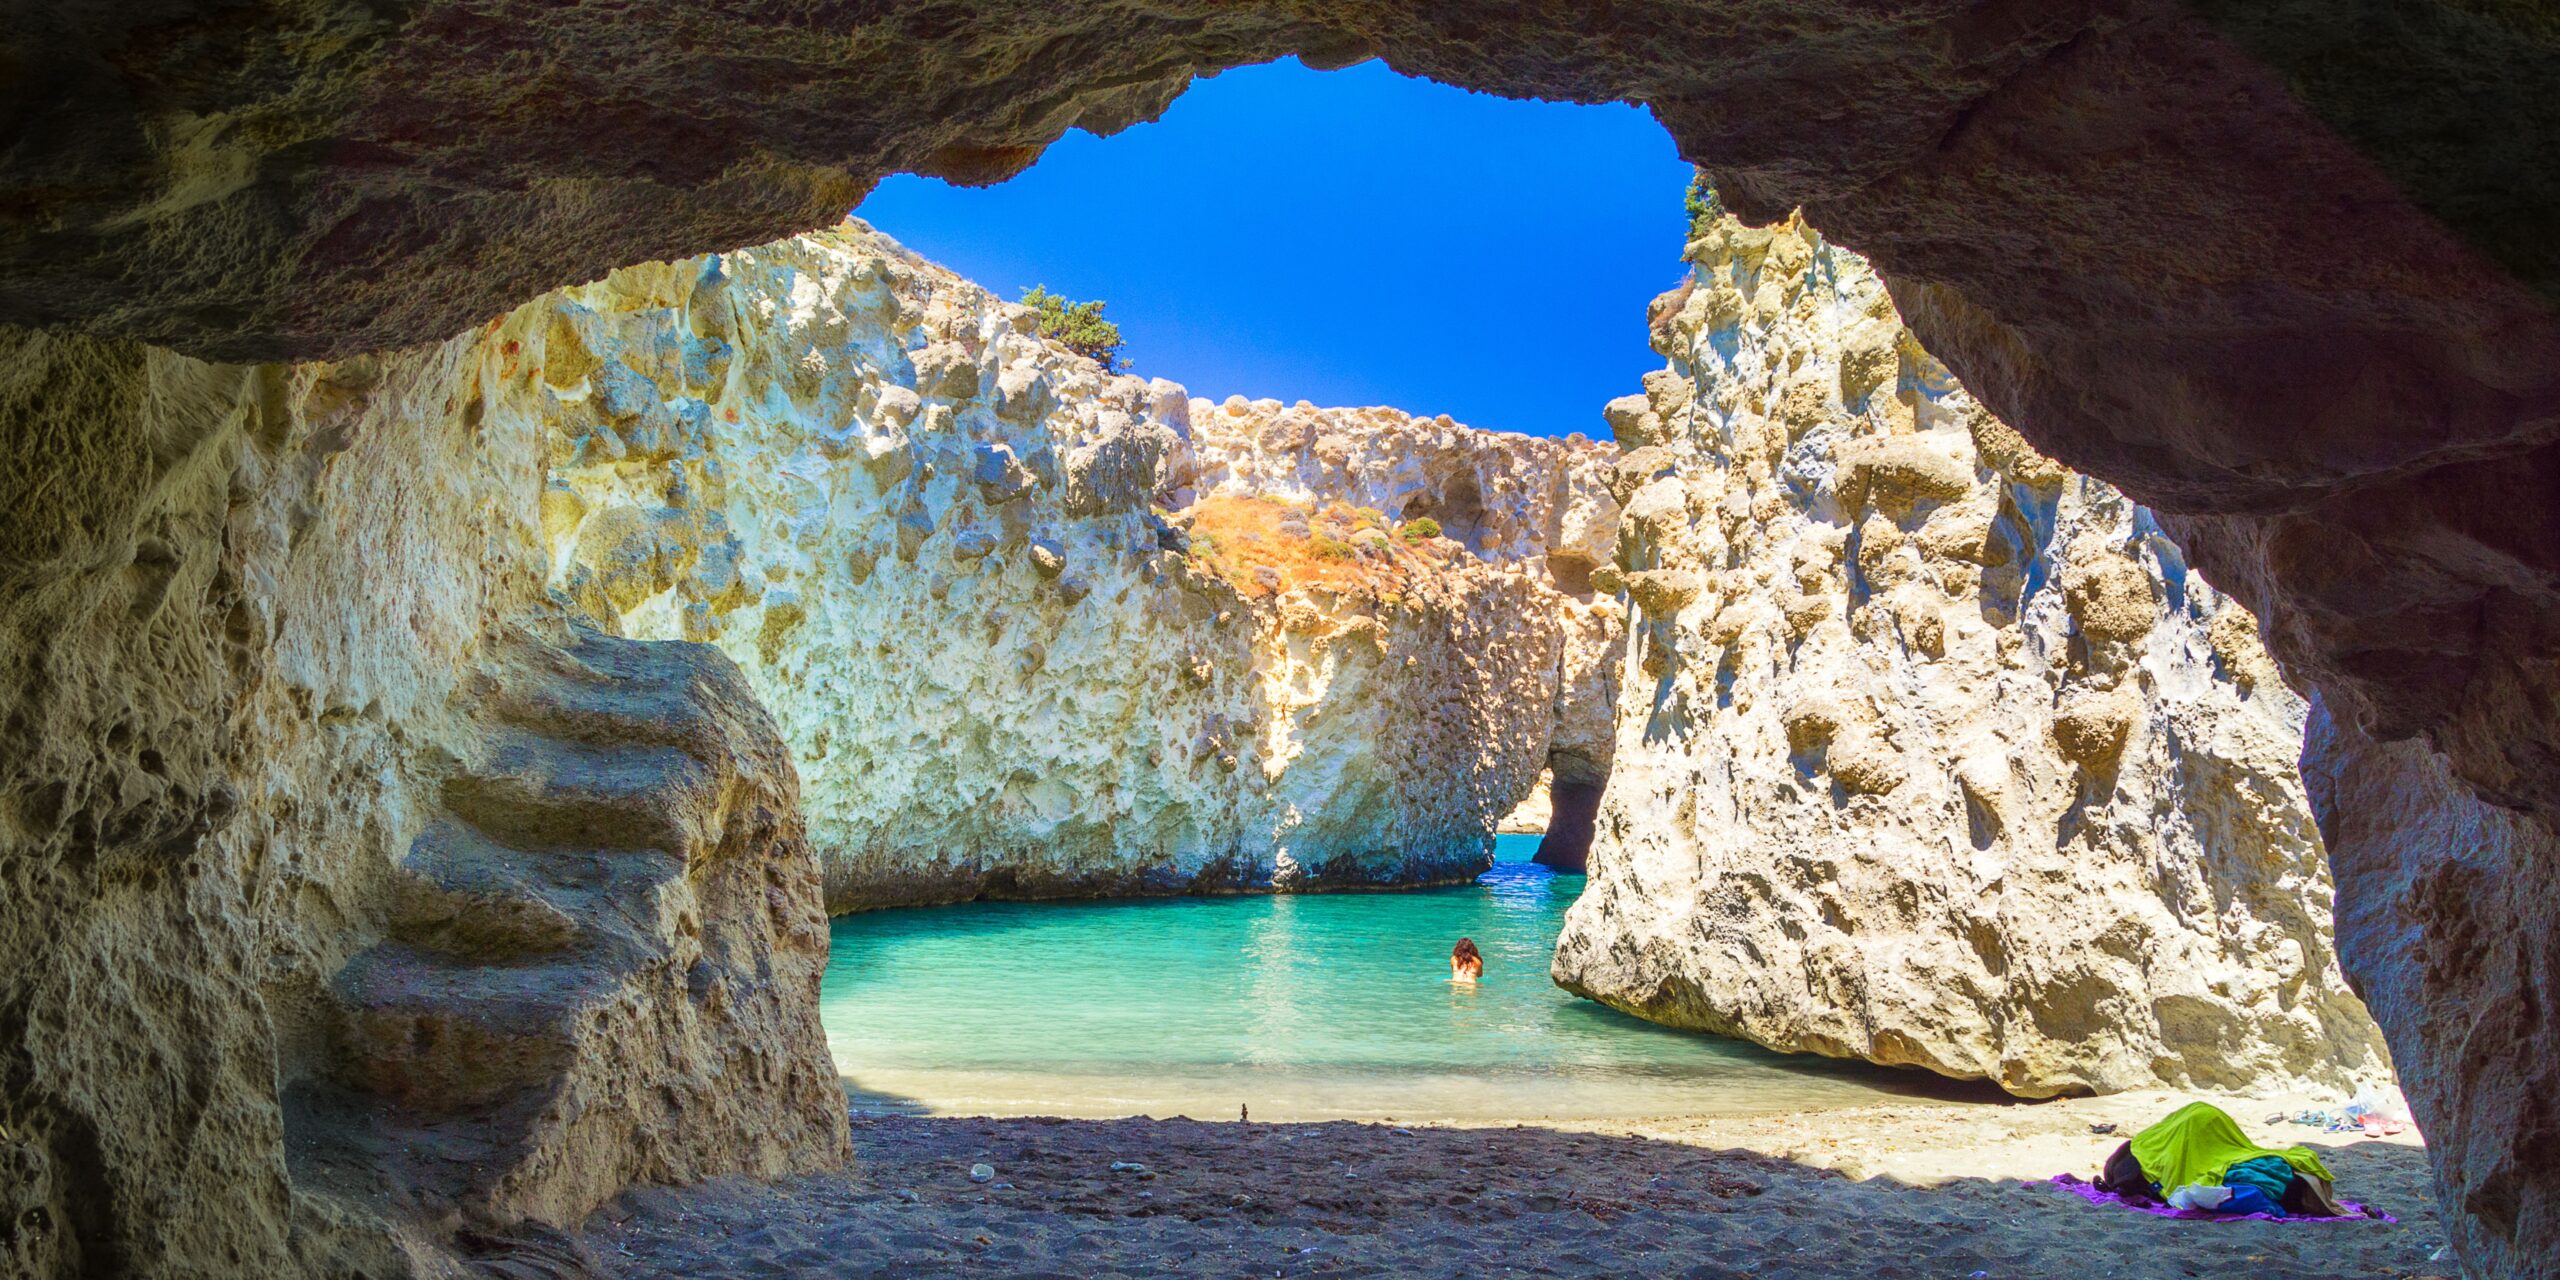 a secluded beach on milos island with only one woman swimming in the crystal clear waters